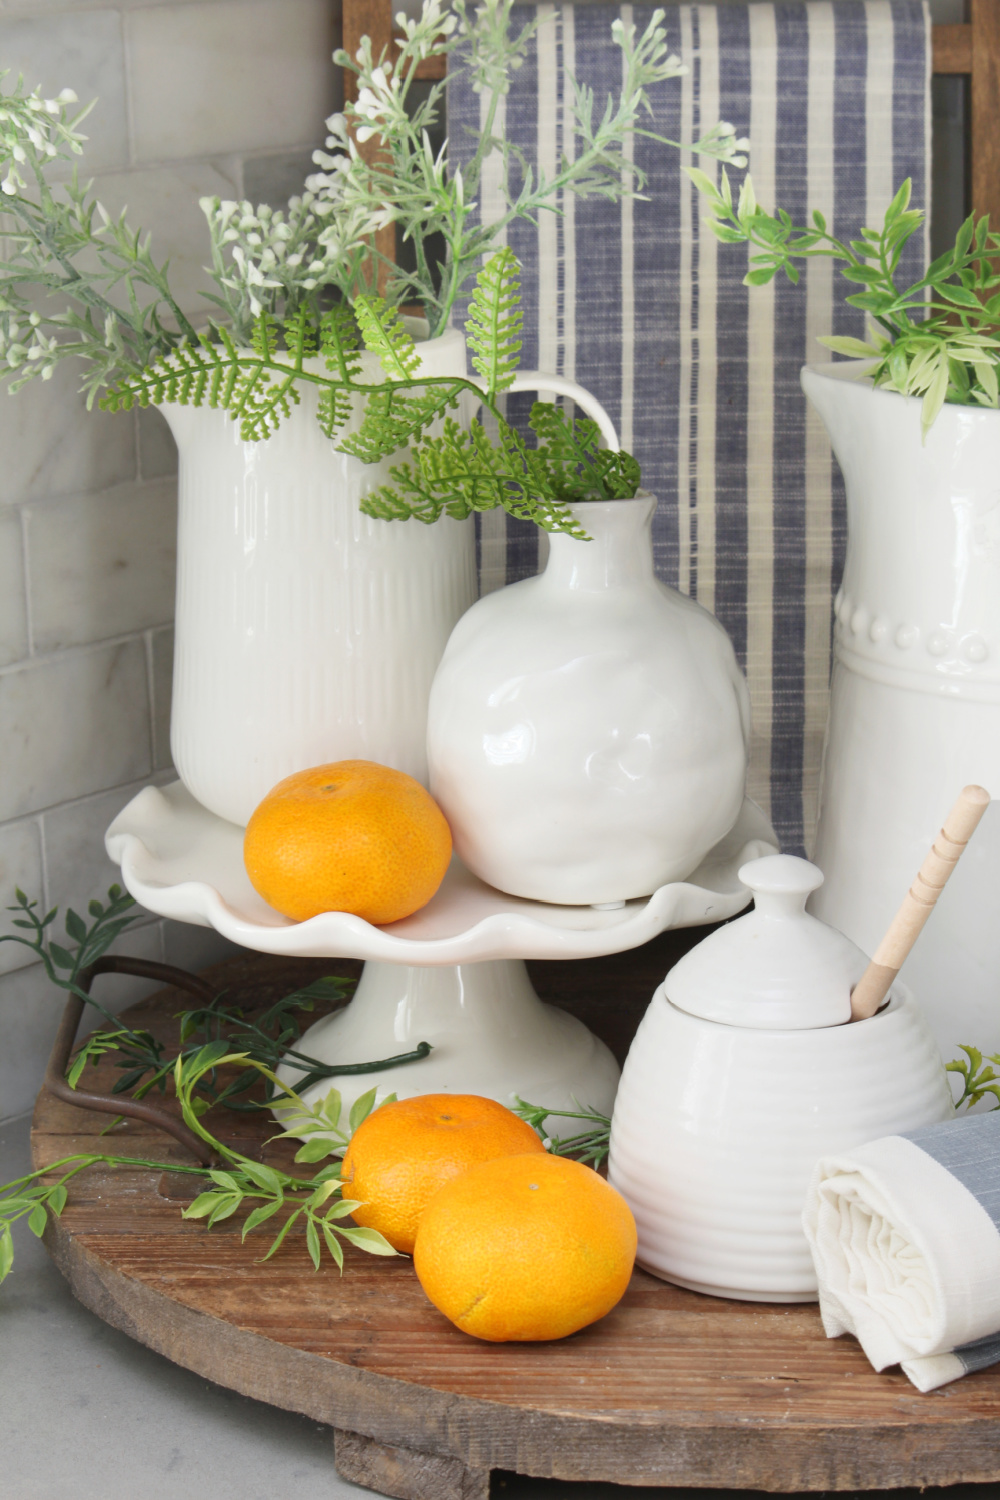 Summer vignette in a kitchen with white ceramics and pops of blue and orange.